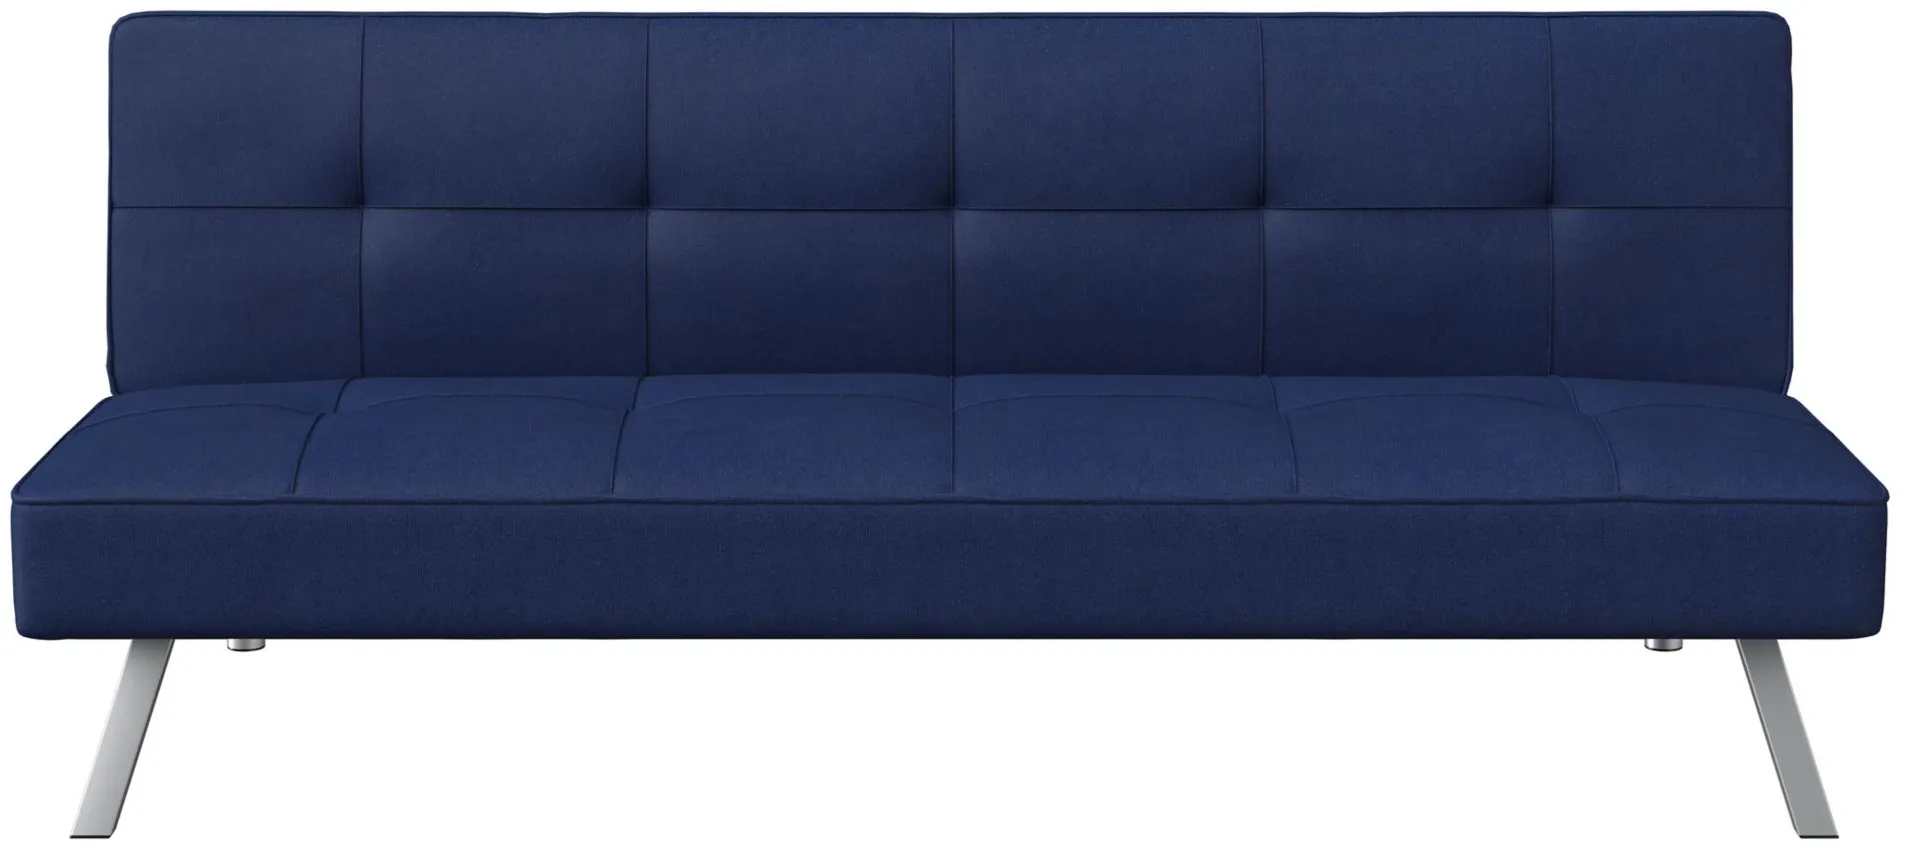 Chester Convertible Futon in Navy Blue by Lifestyle Solutions